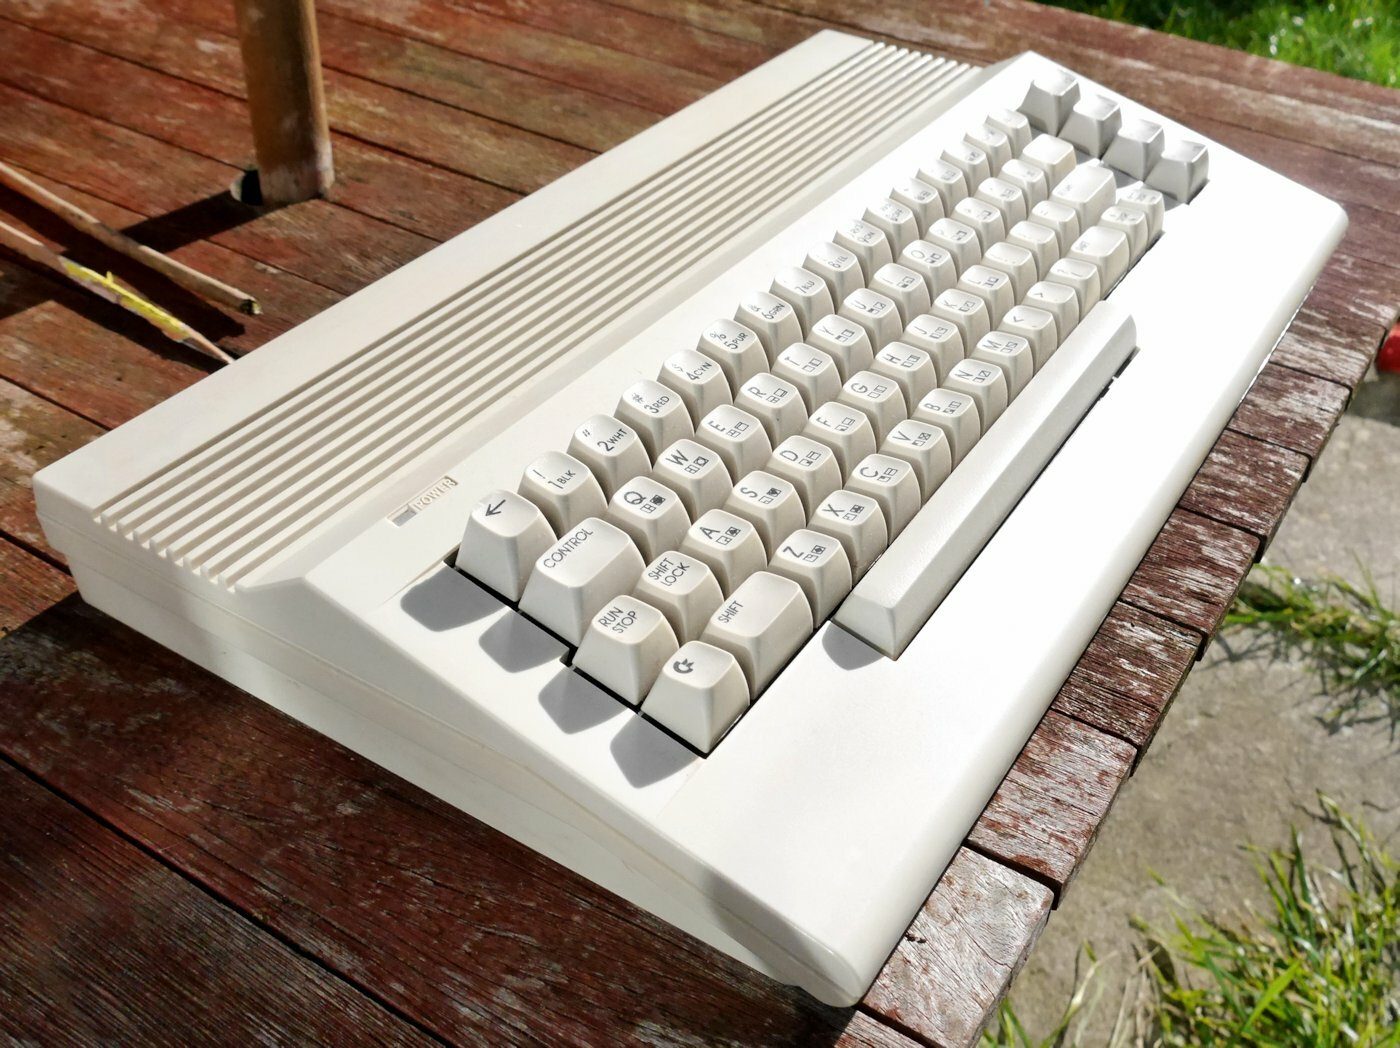 37 years ago today: the Commodore 64 debut at CES